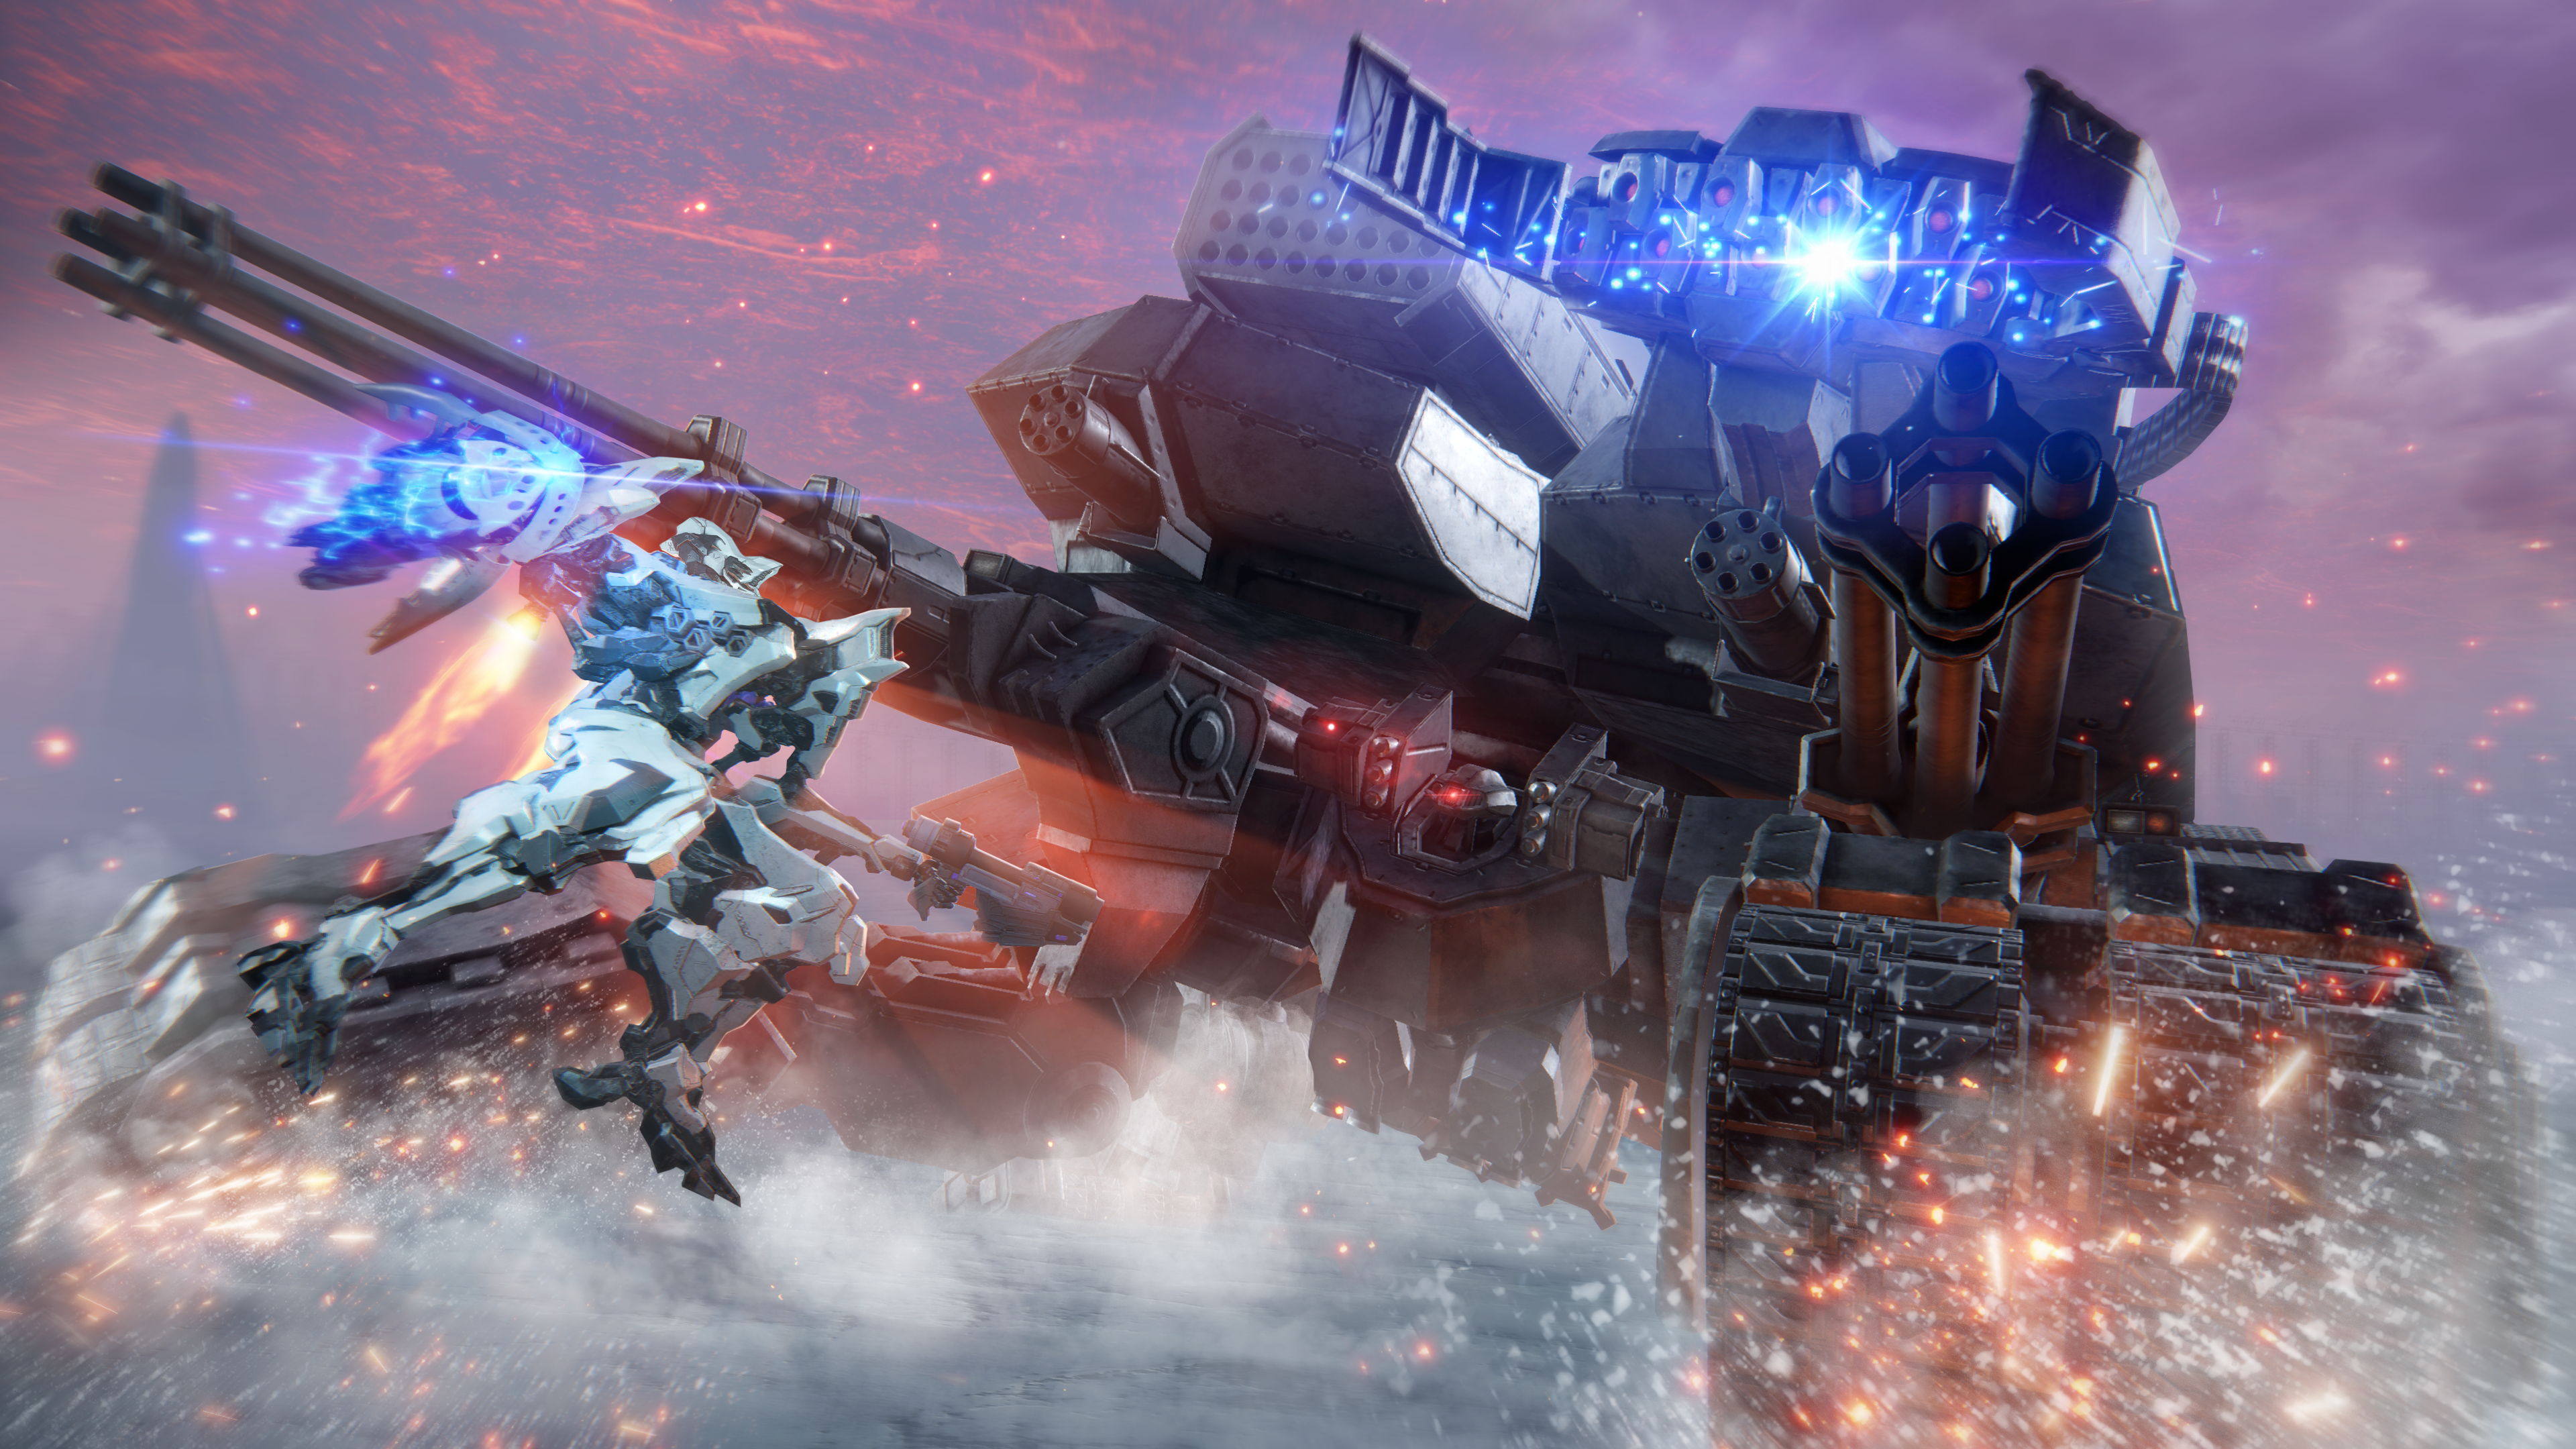 Armored Core VI: Fires Of Rubicon Leaked Trophies List - Gameranx